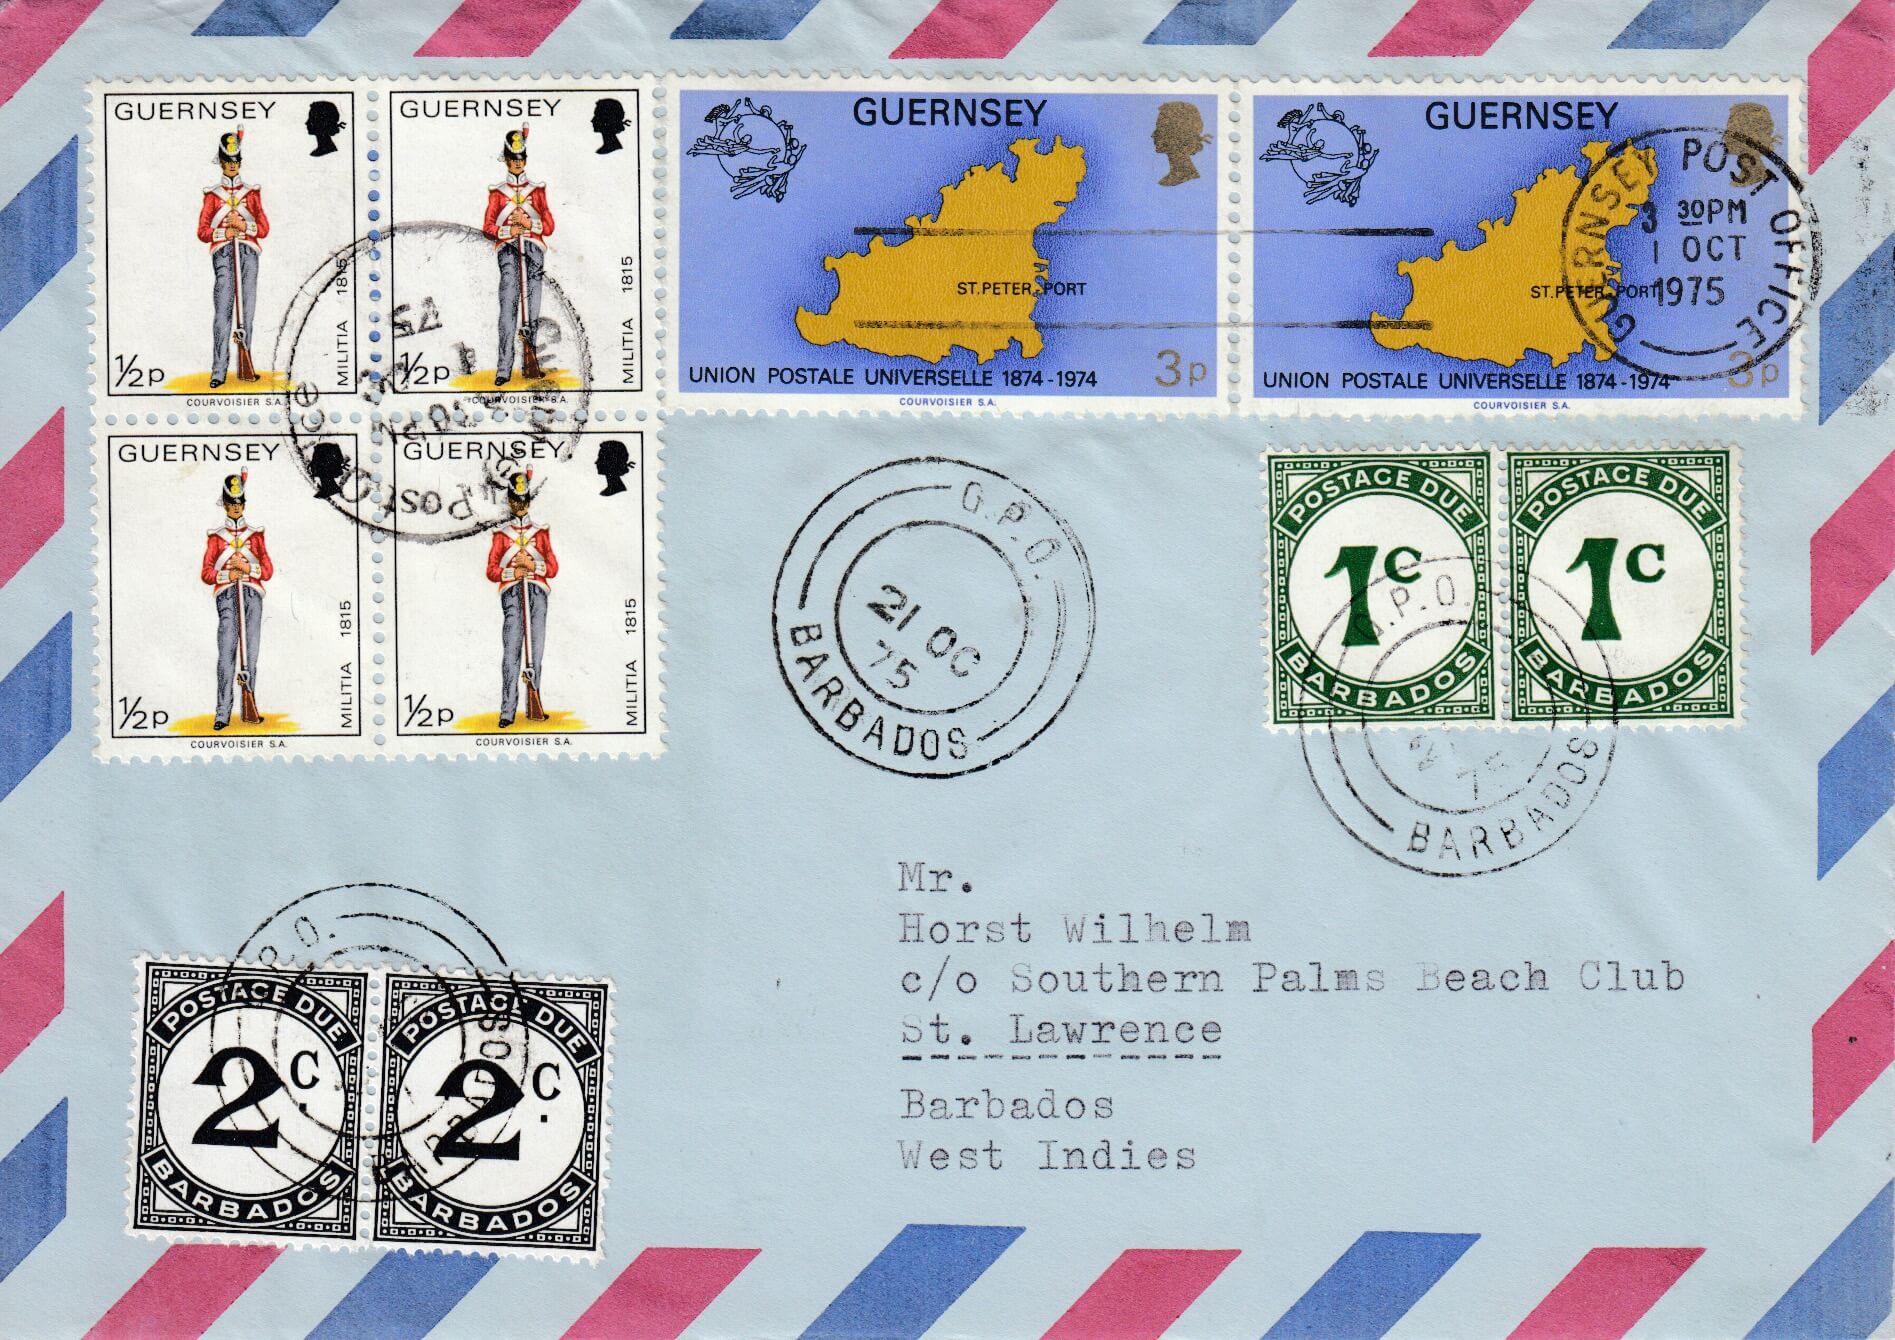 Barbados incoming underpaid cover sent from Guernsey 1st October 1975 to ℅ address, Southern Palms Beach Club , with GPO cancel over postage due stamps 21st October 1975. Postage Dues are 2 x 2c (SGD12) and 2 x 1c (SGD7)